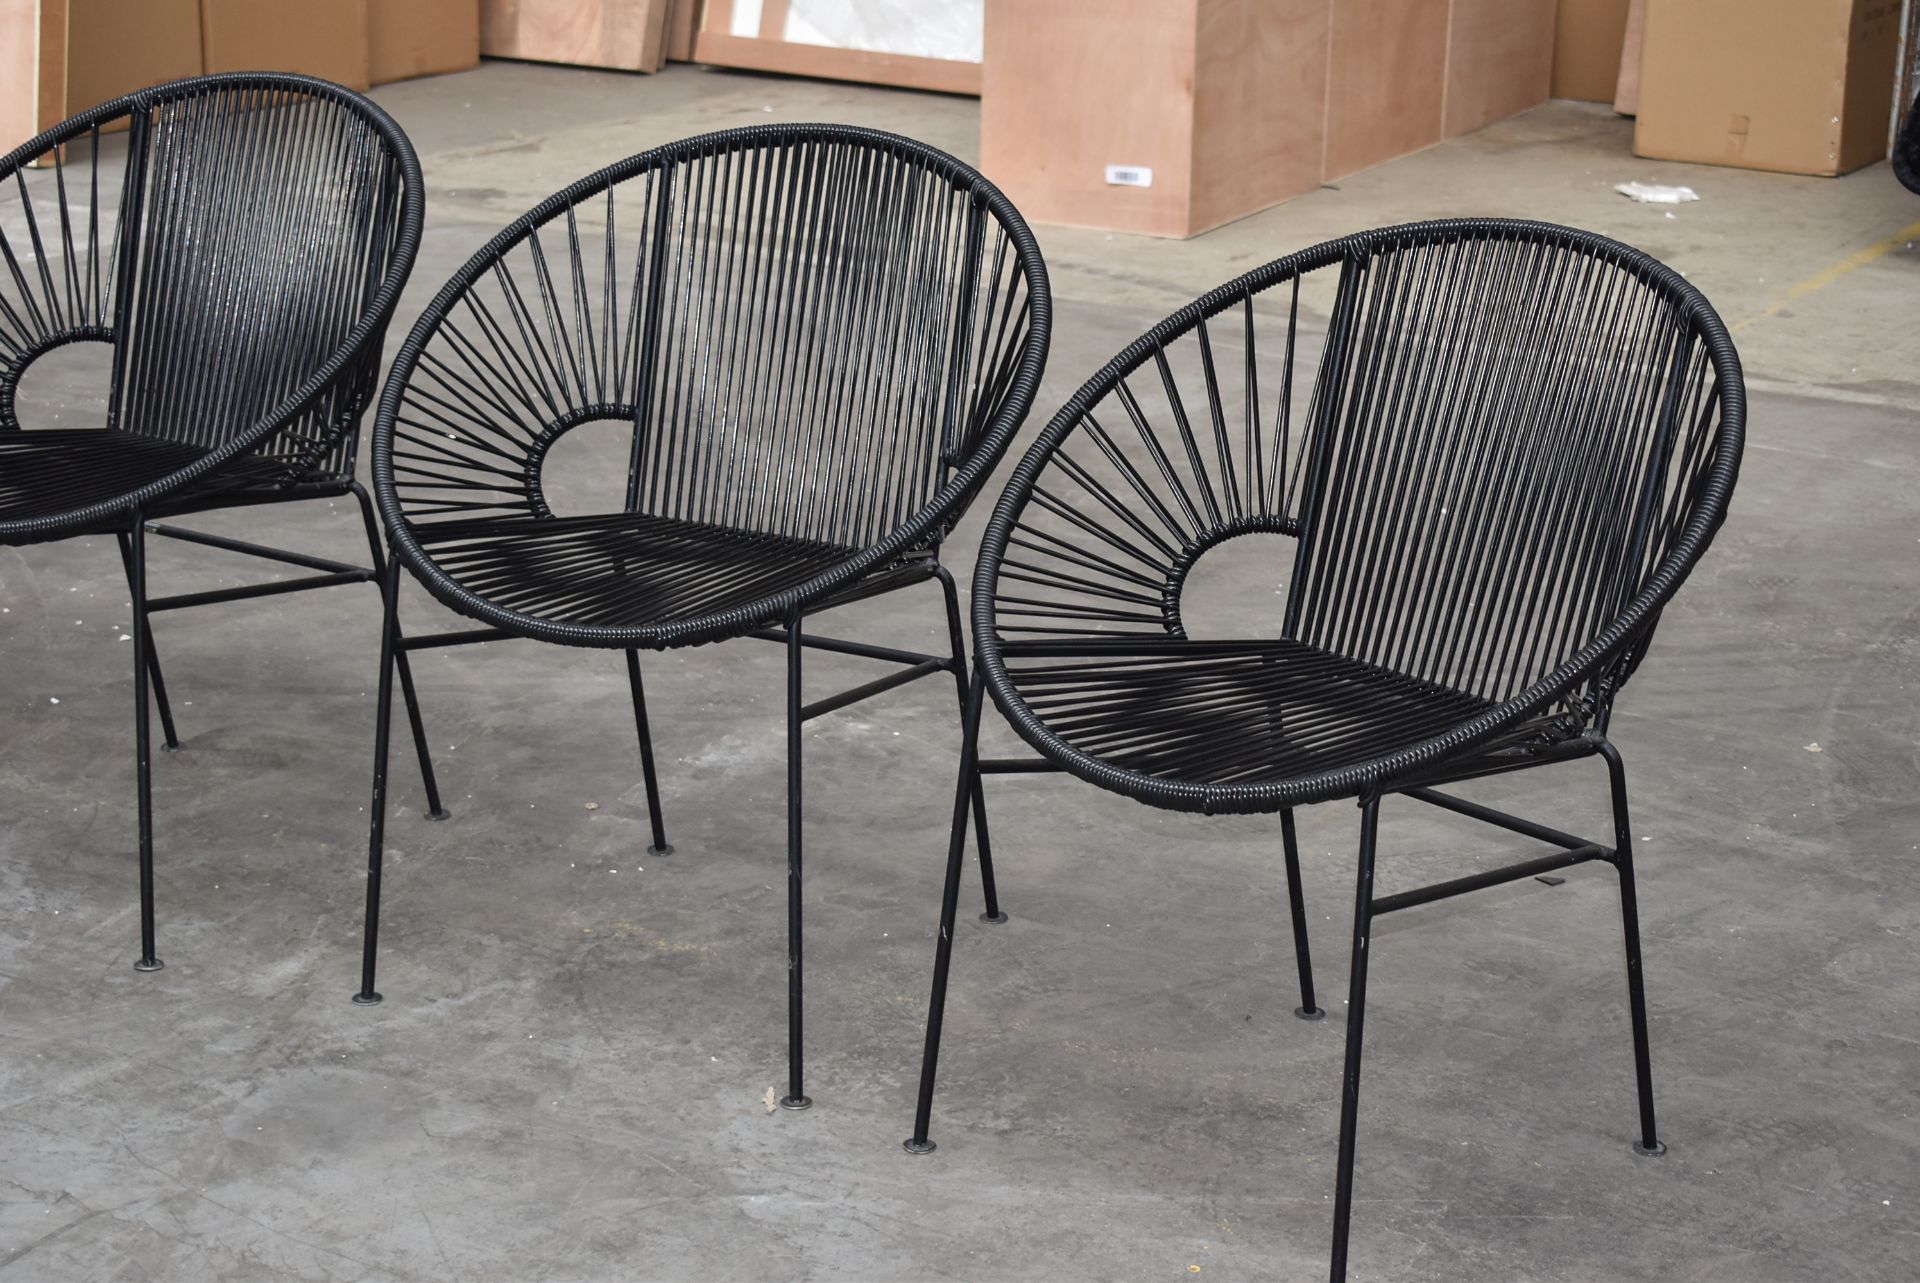 4 x Innit Designer Chairs - Acapulco Style Chairs in Black Suitable For Indoor or Outdoor Use - - Image 2 of 9